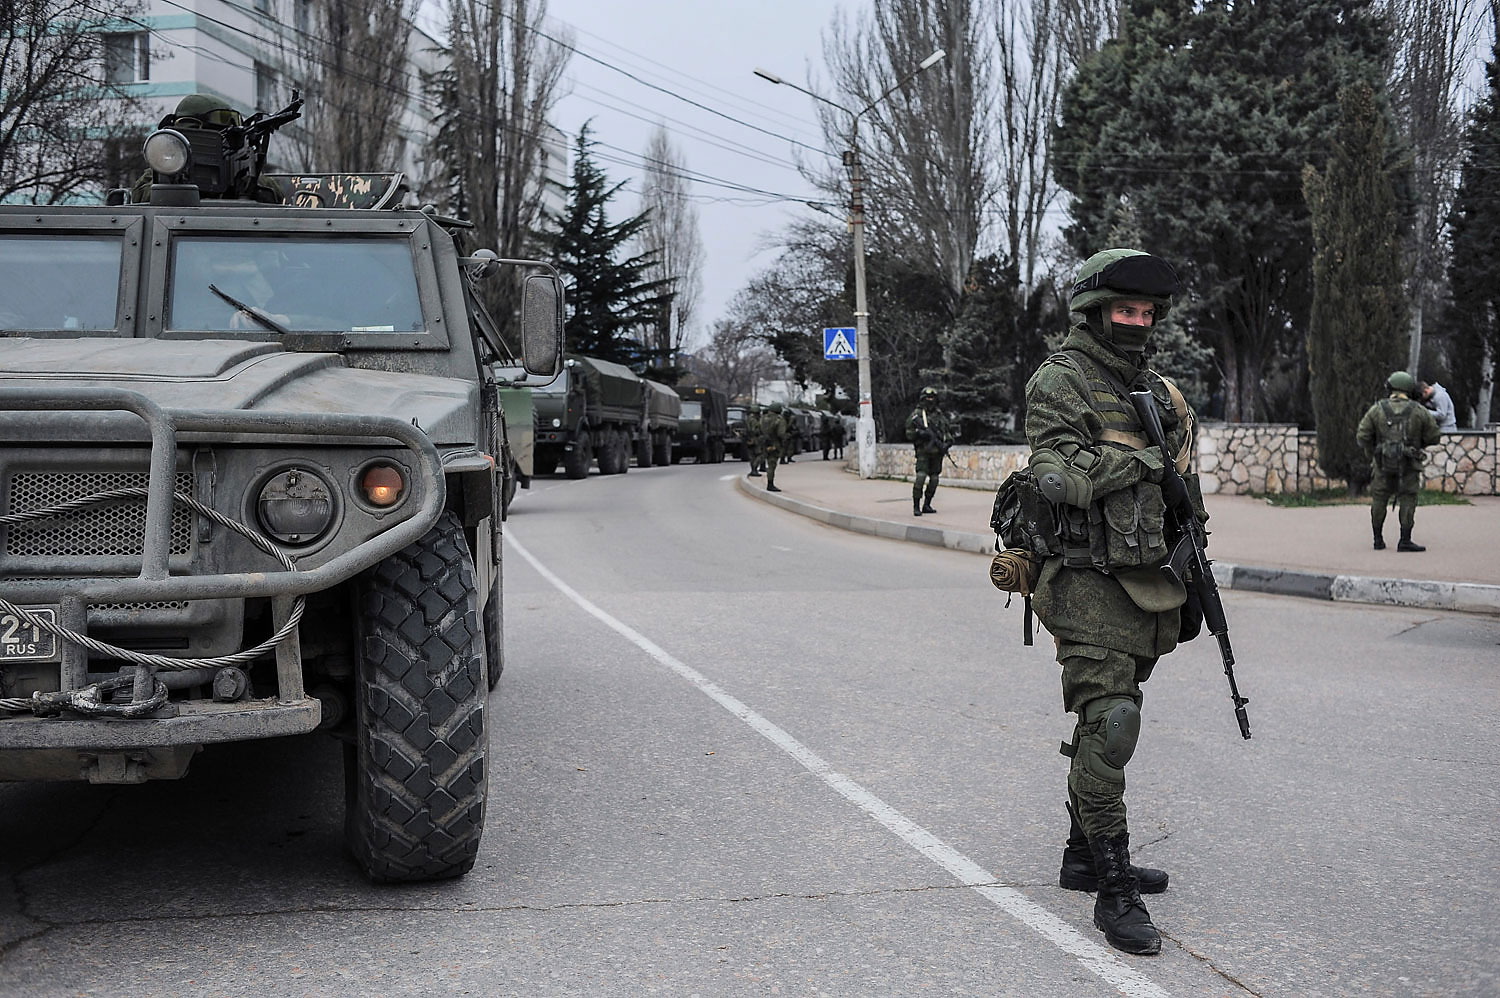 Troops in unmarked uniforms stand guard in Balaklava on the outskirts of Sevastopol, Ukraine, March 1, 2014. (Andrew Lubimov&mdash;AP)